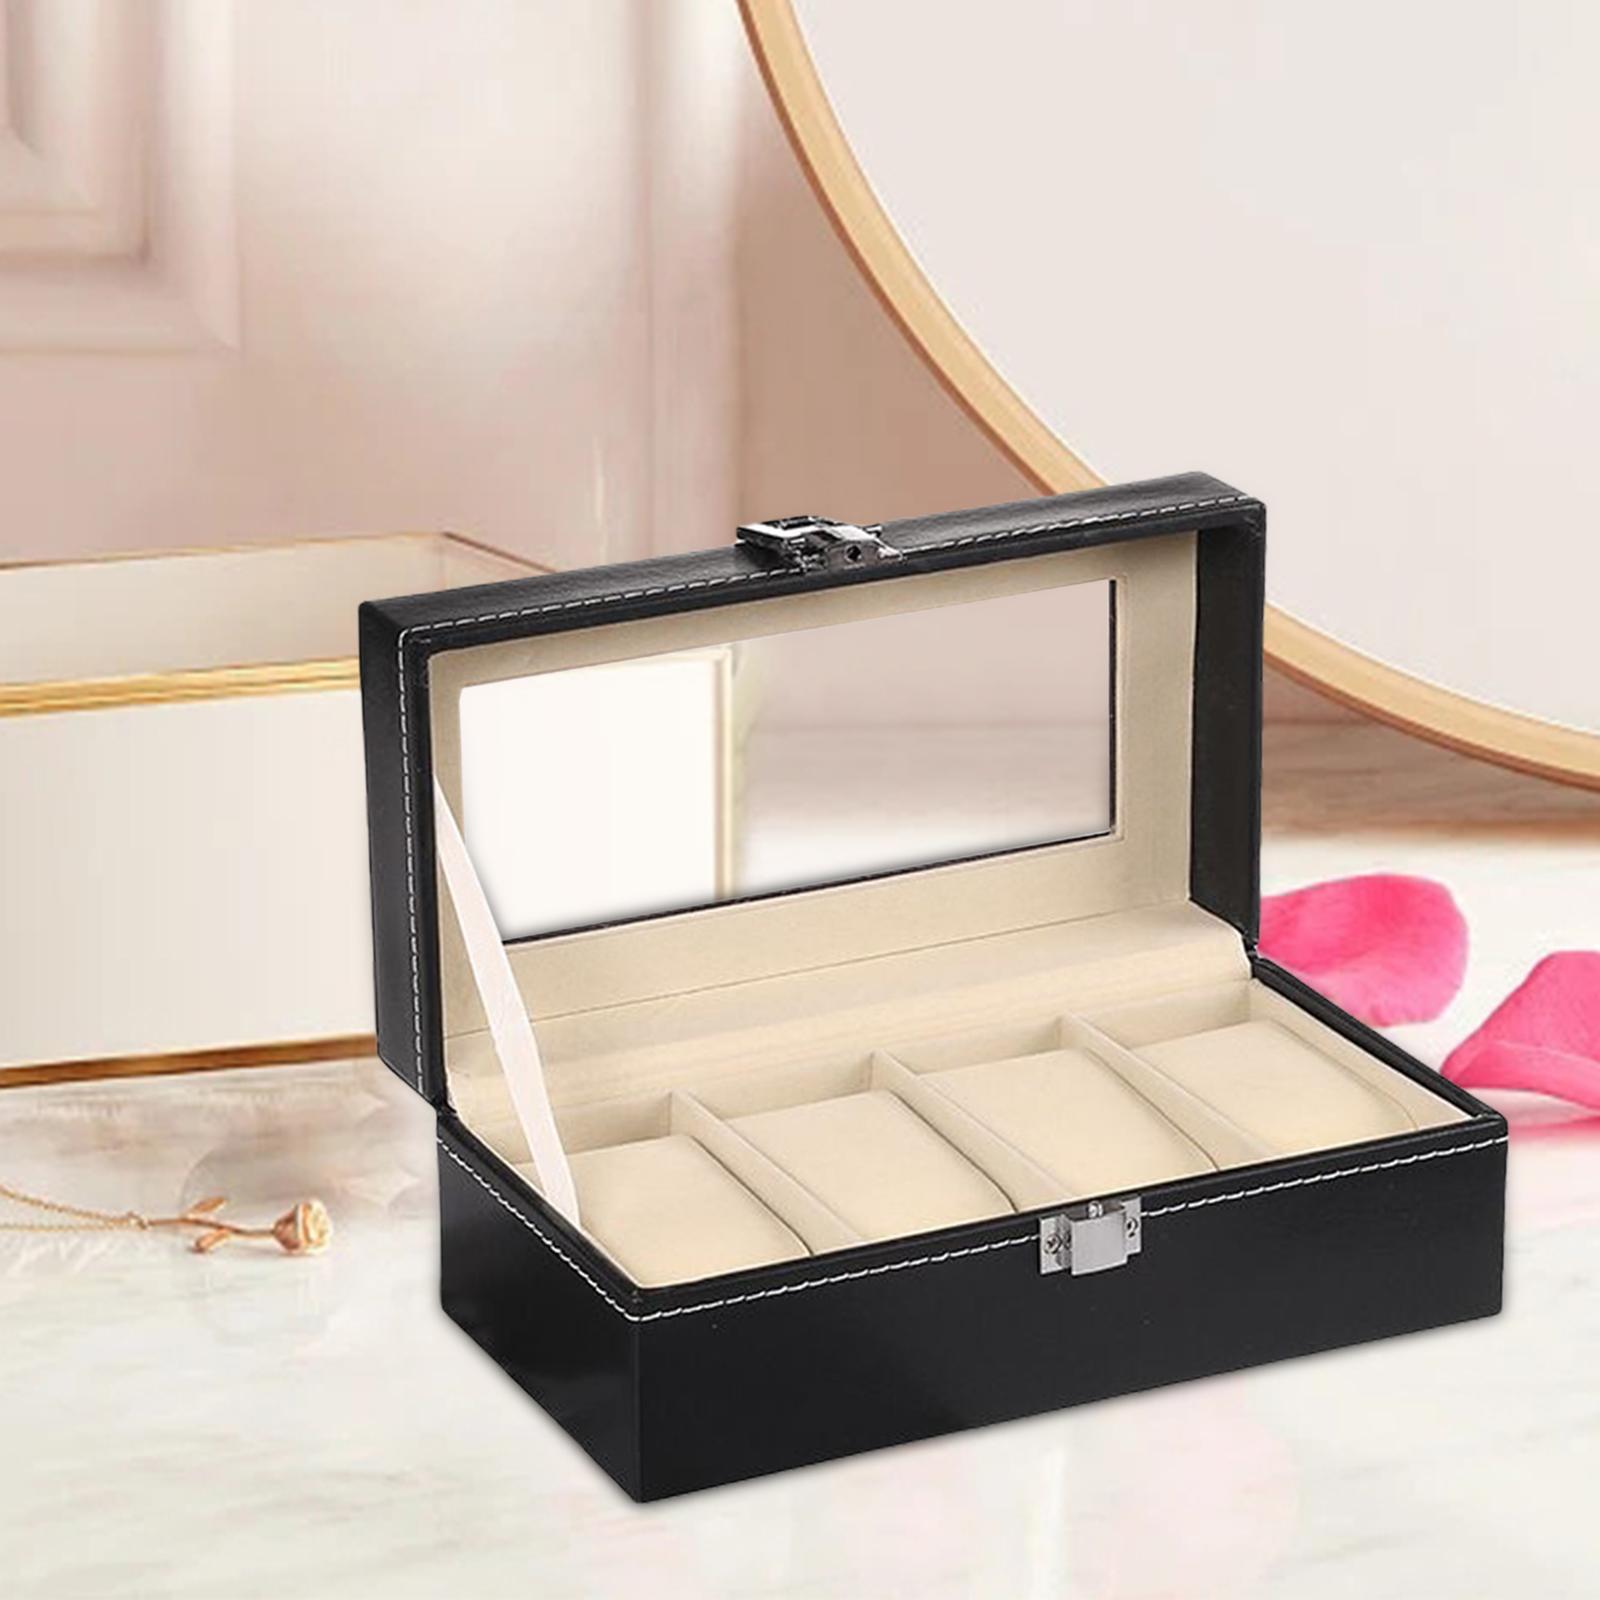 Watch Box, Elegant Portable Watch Collection Box Case Organizer for Storage and Display for Men & Women